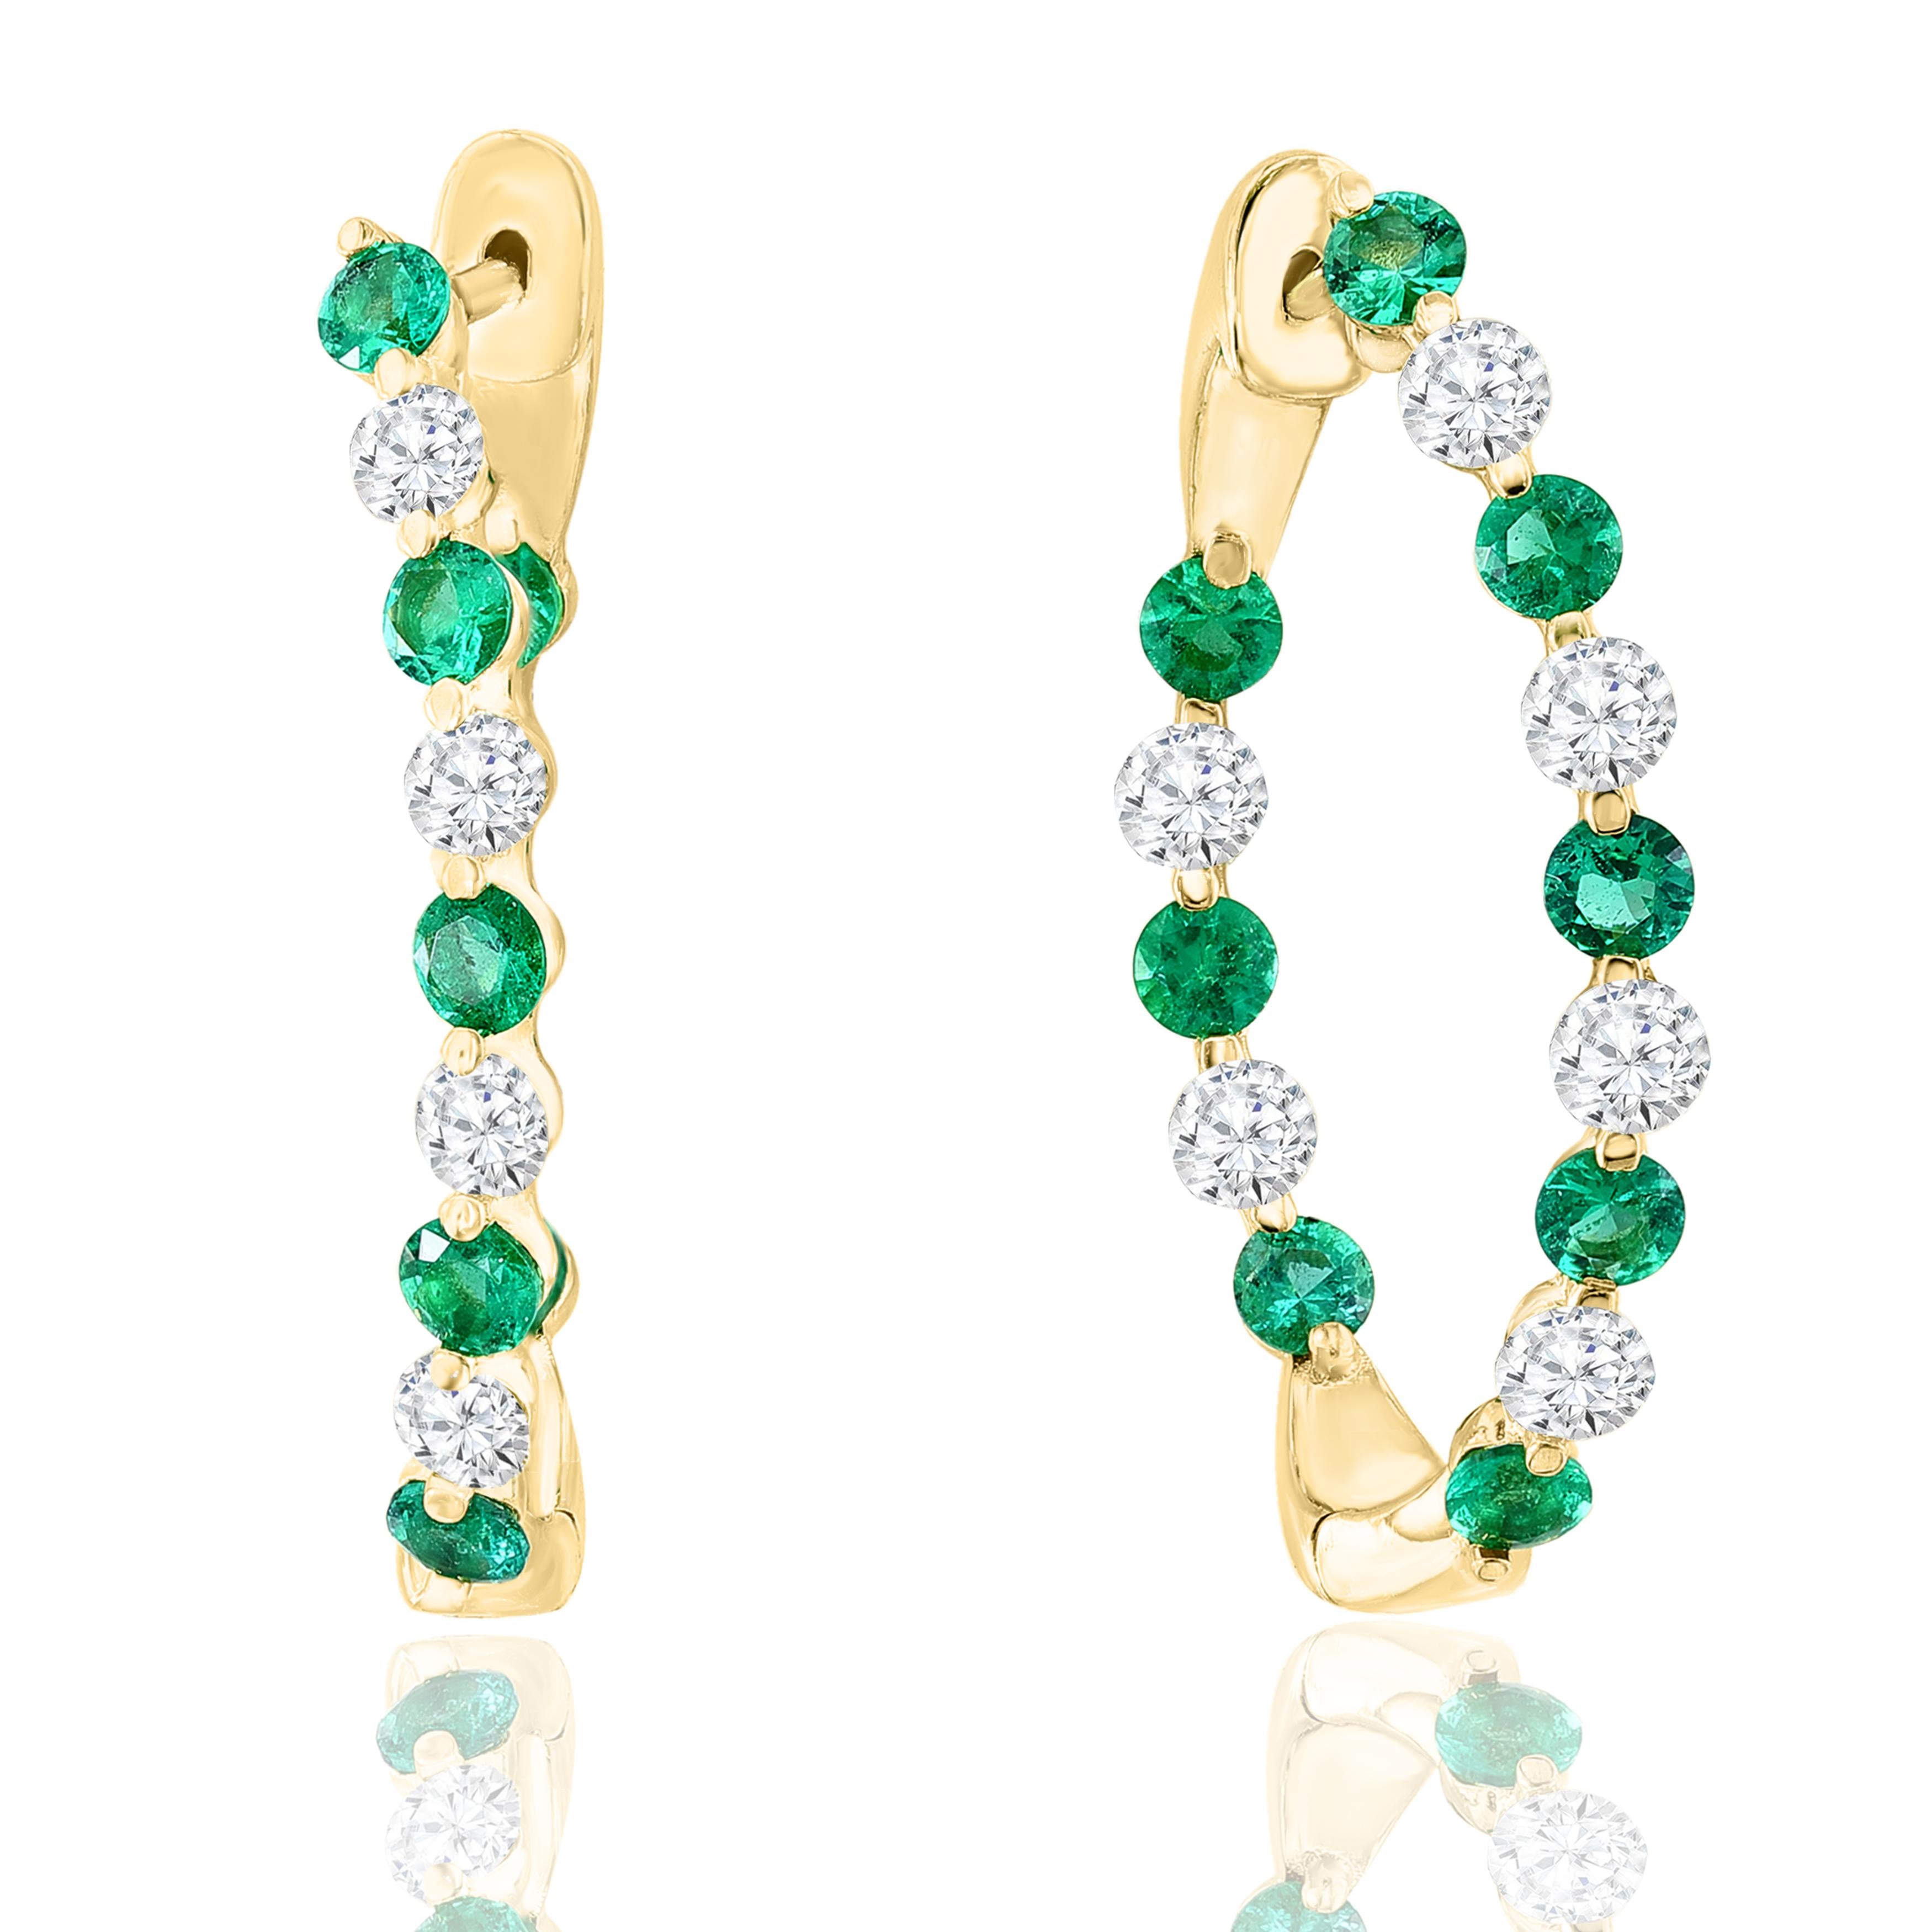 Modern 1.41 Carat Round Cut Emerald and Diamond Hoop Earrings in 14K Yellow Gold For Sale